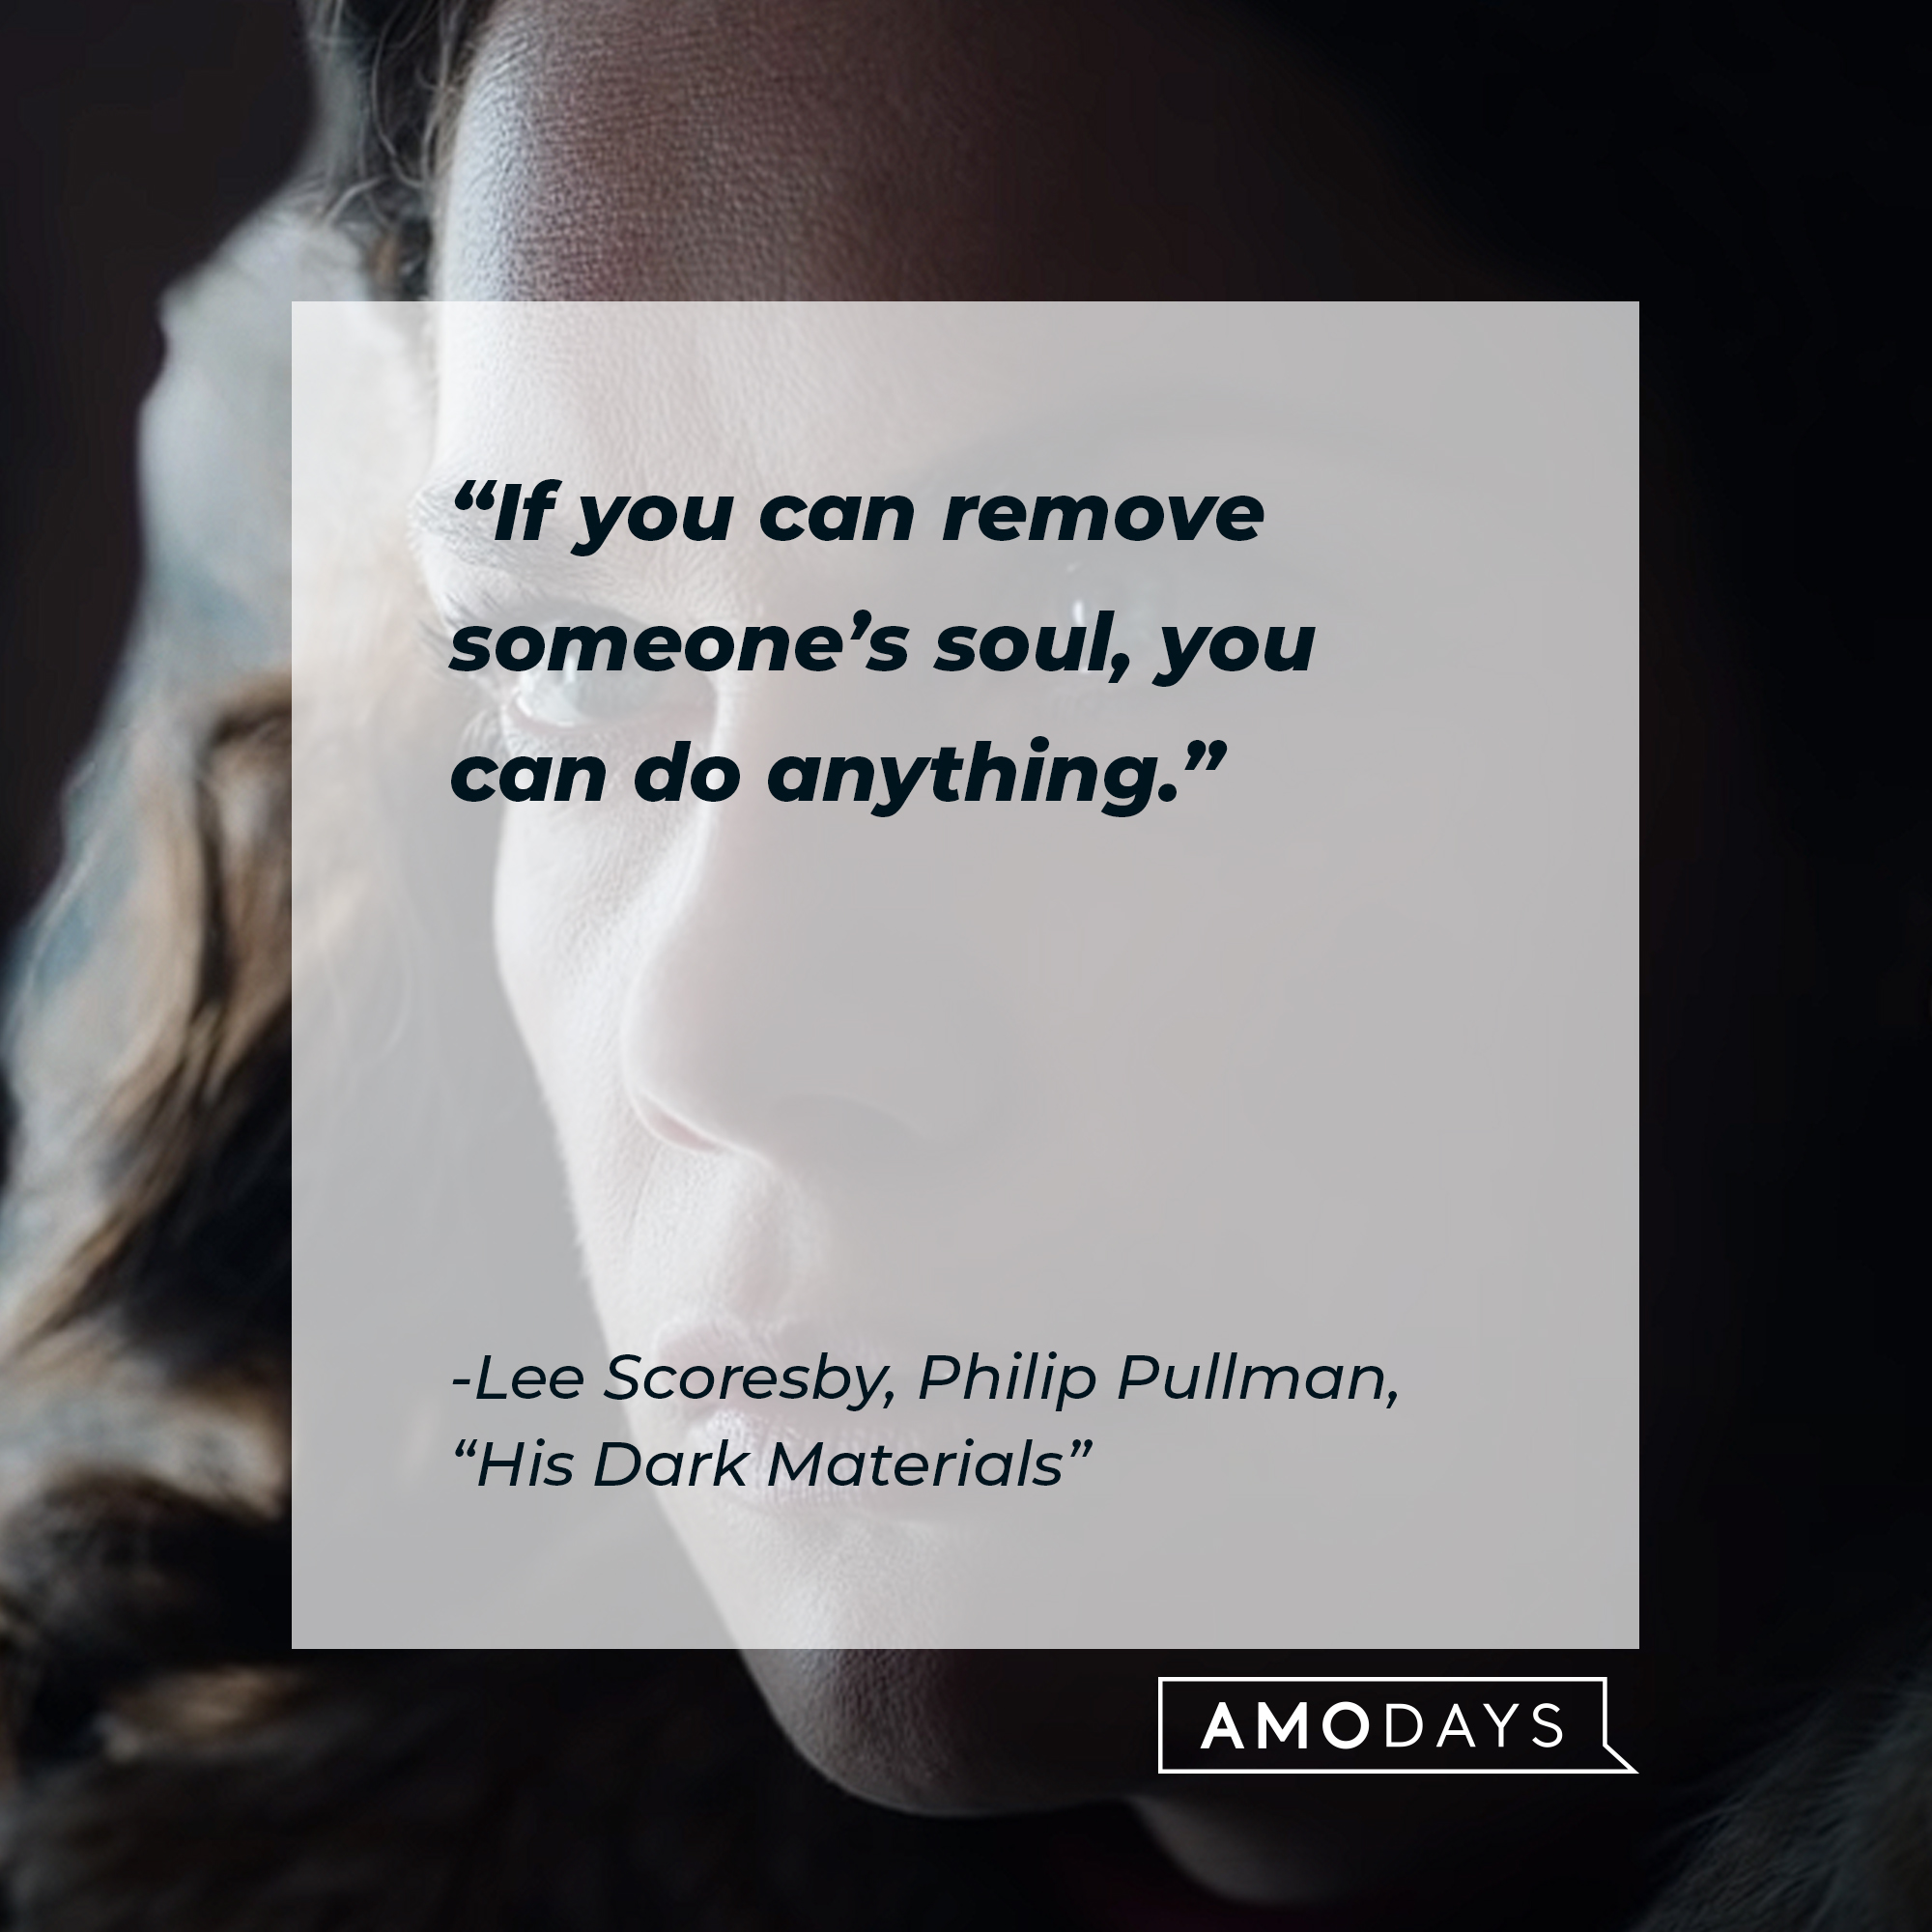 An image of a character from"His Dark Materials" with a quote from the character Lee Scoresby: “If you can remove someone’s soul, you can do anything.” | Source: youtube.com/HBO